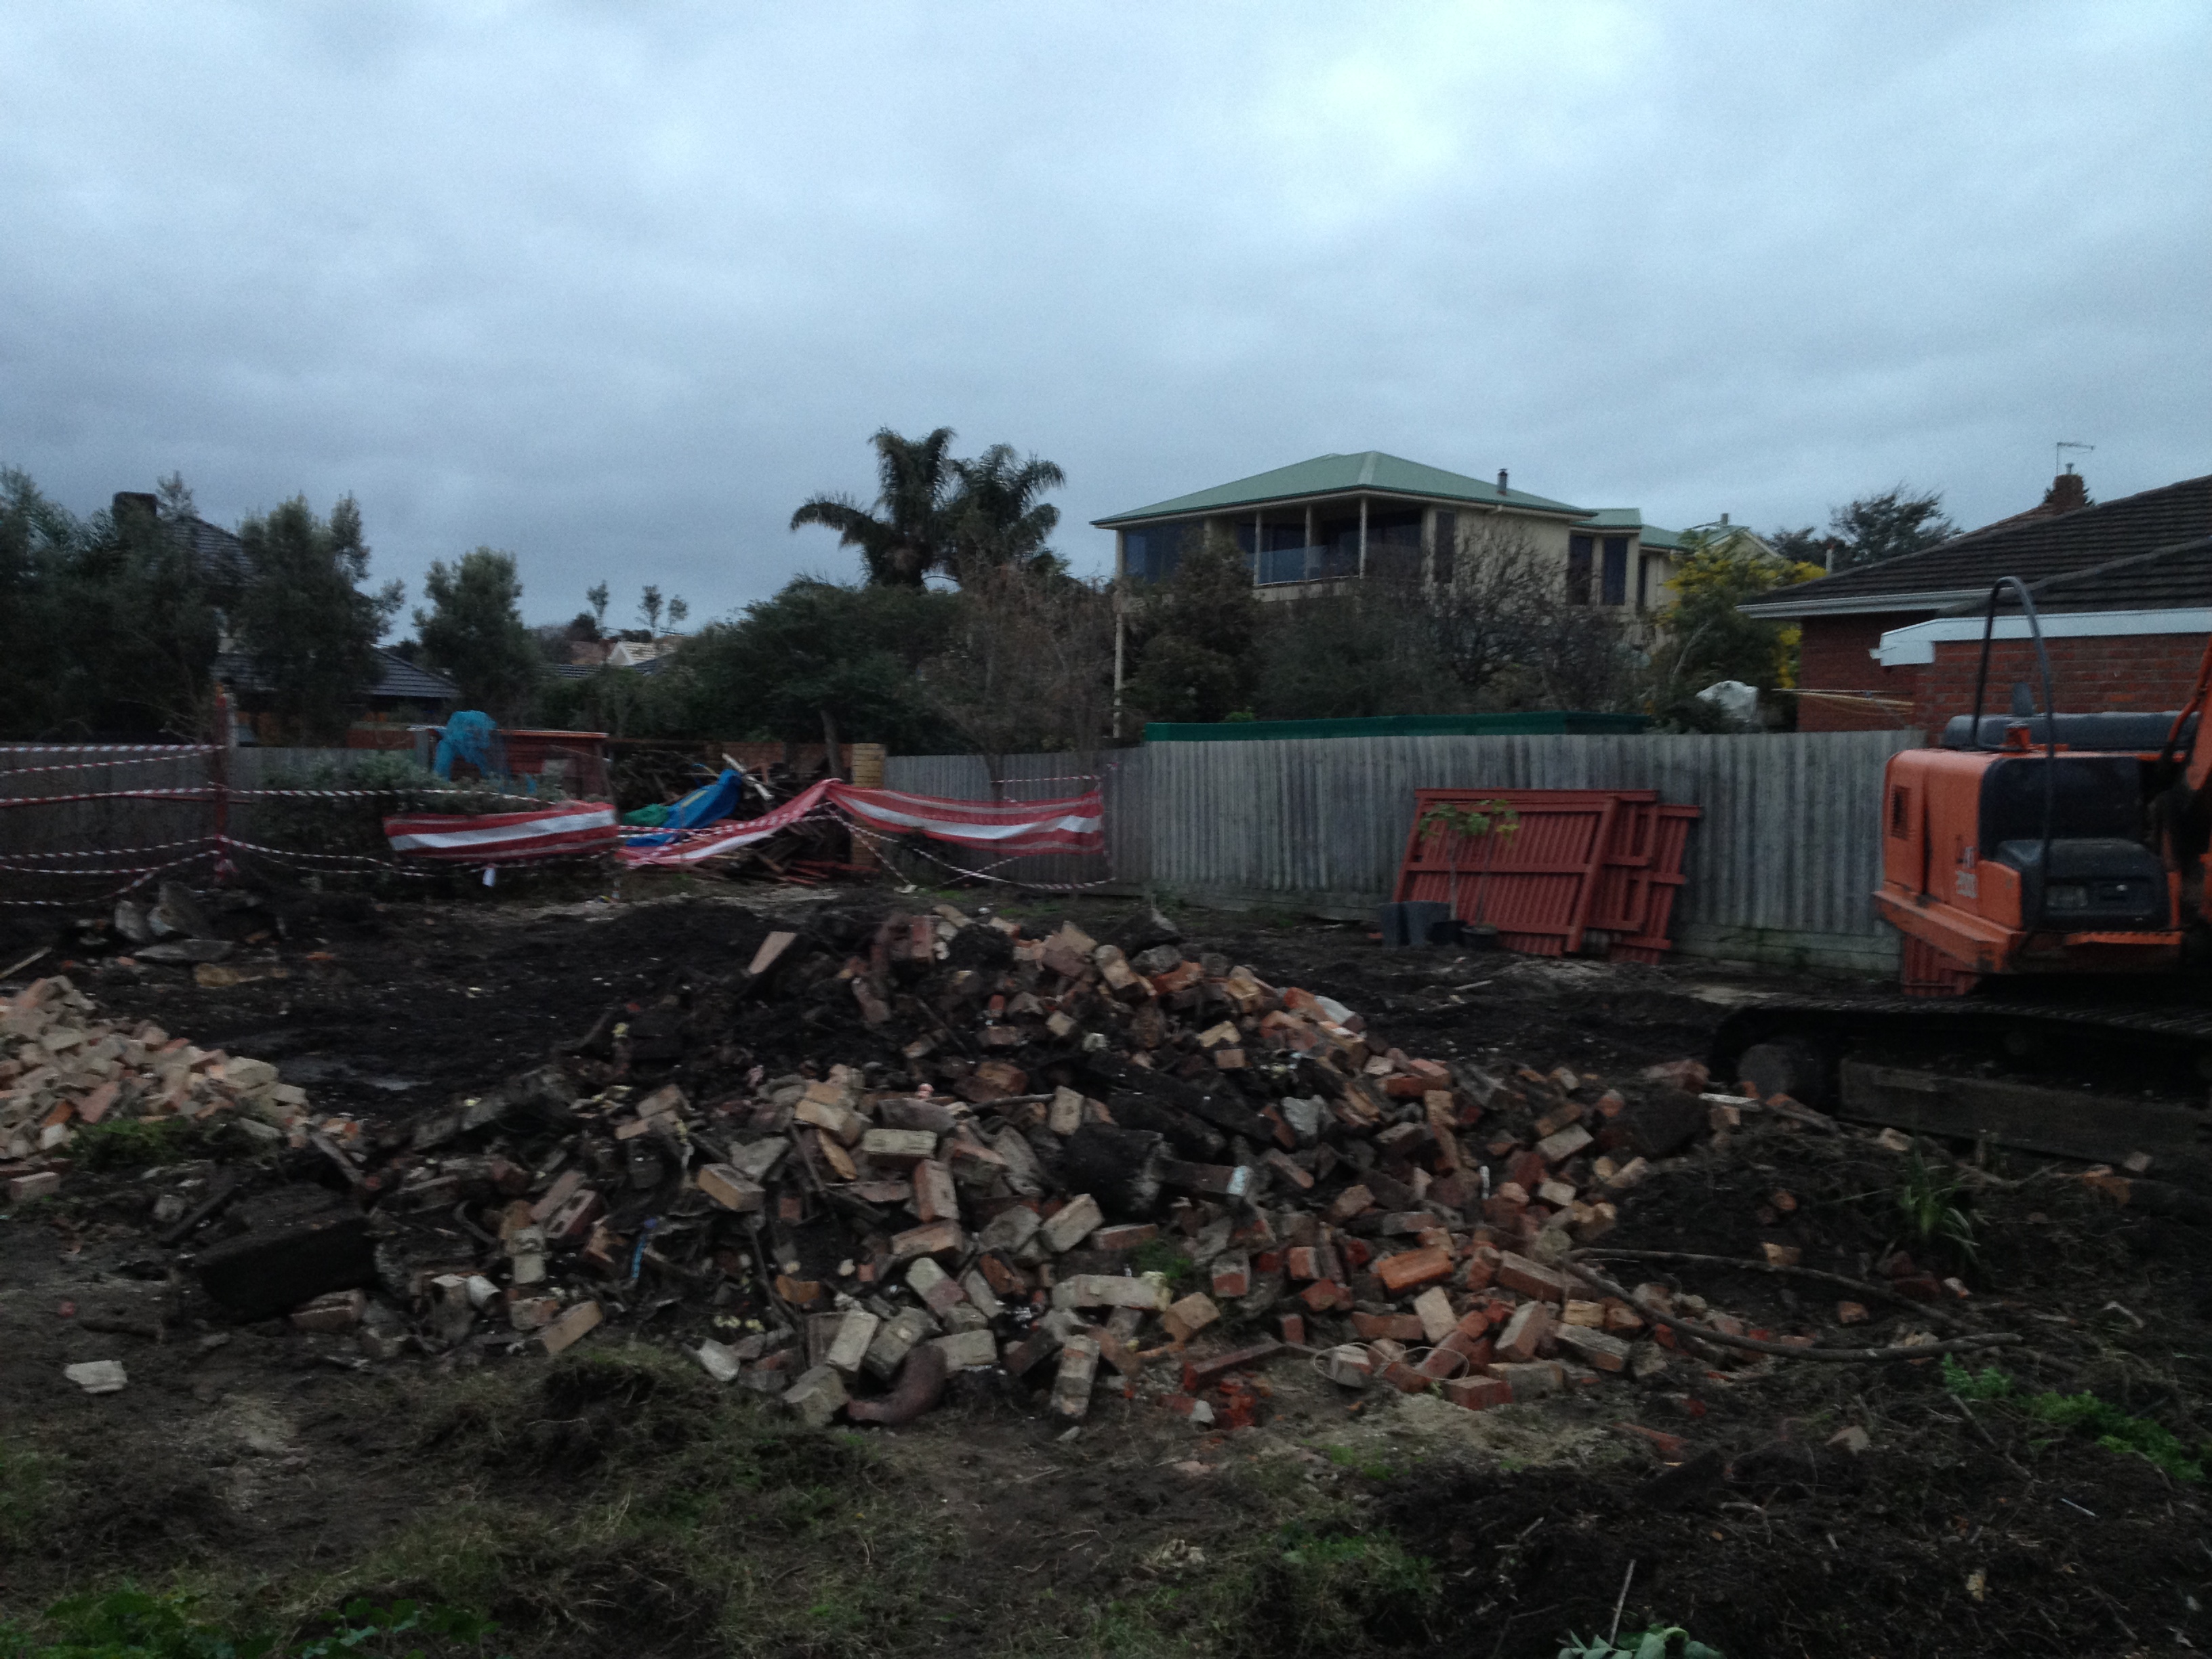 Knockdown & rebuild - does the entire lot need to be cleared